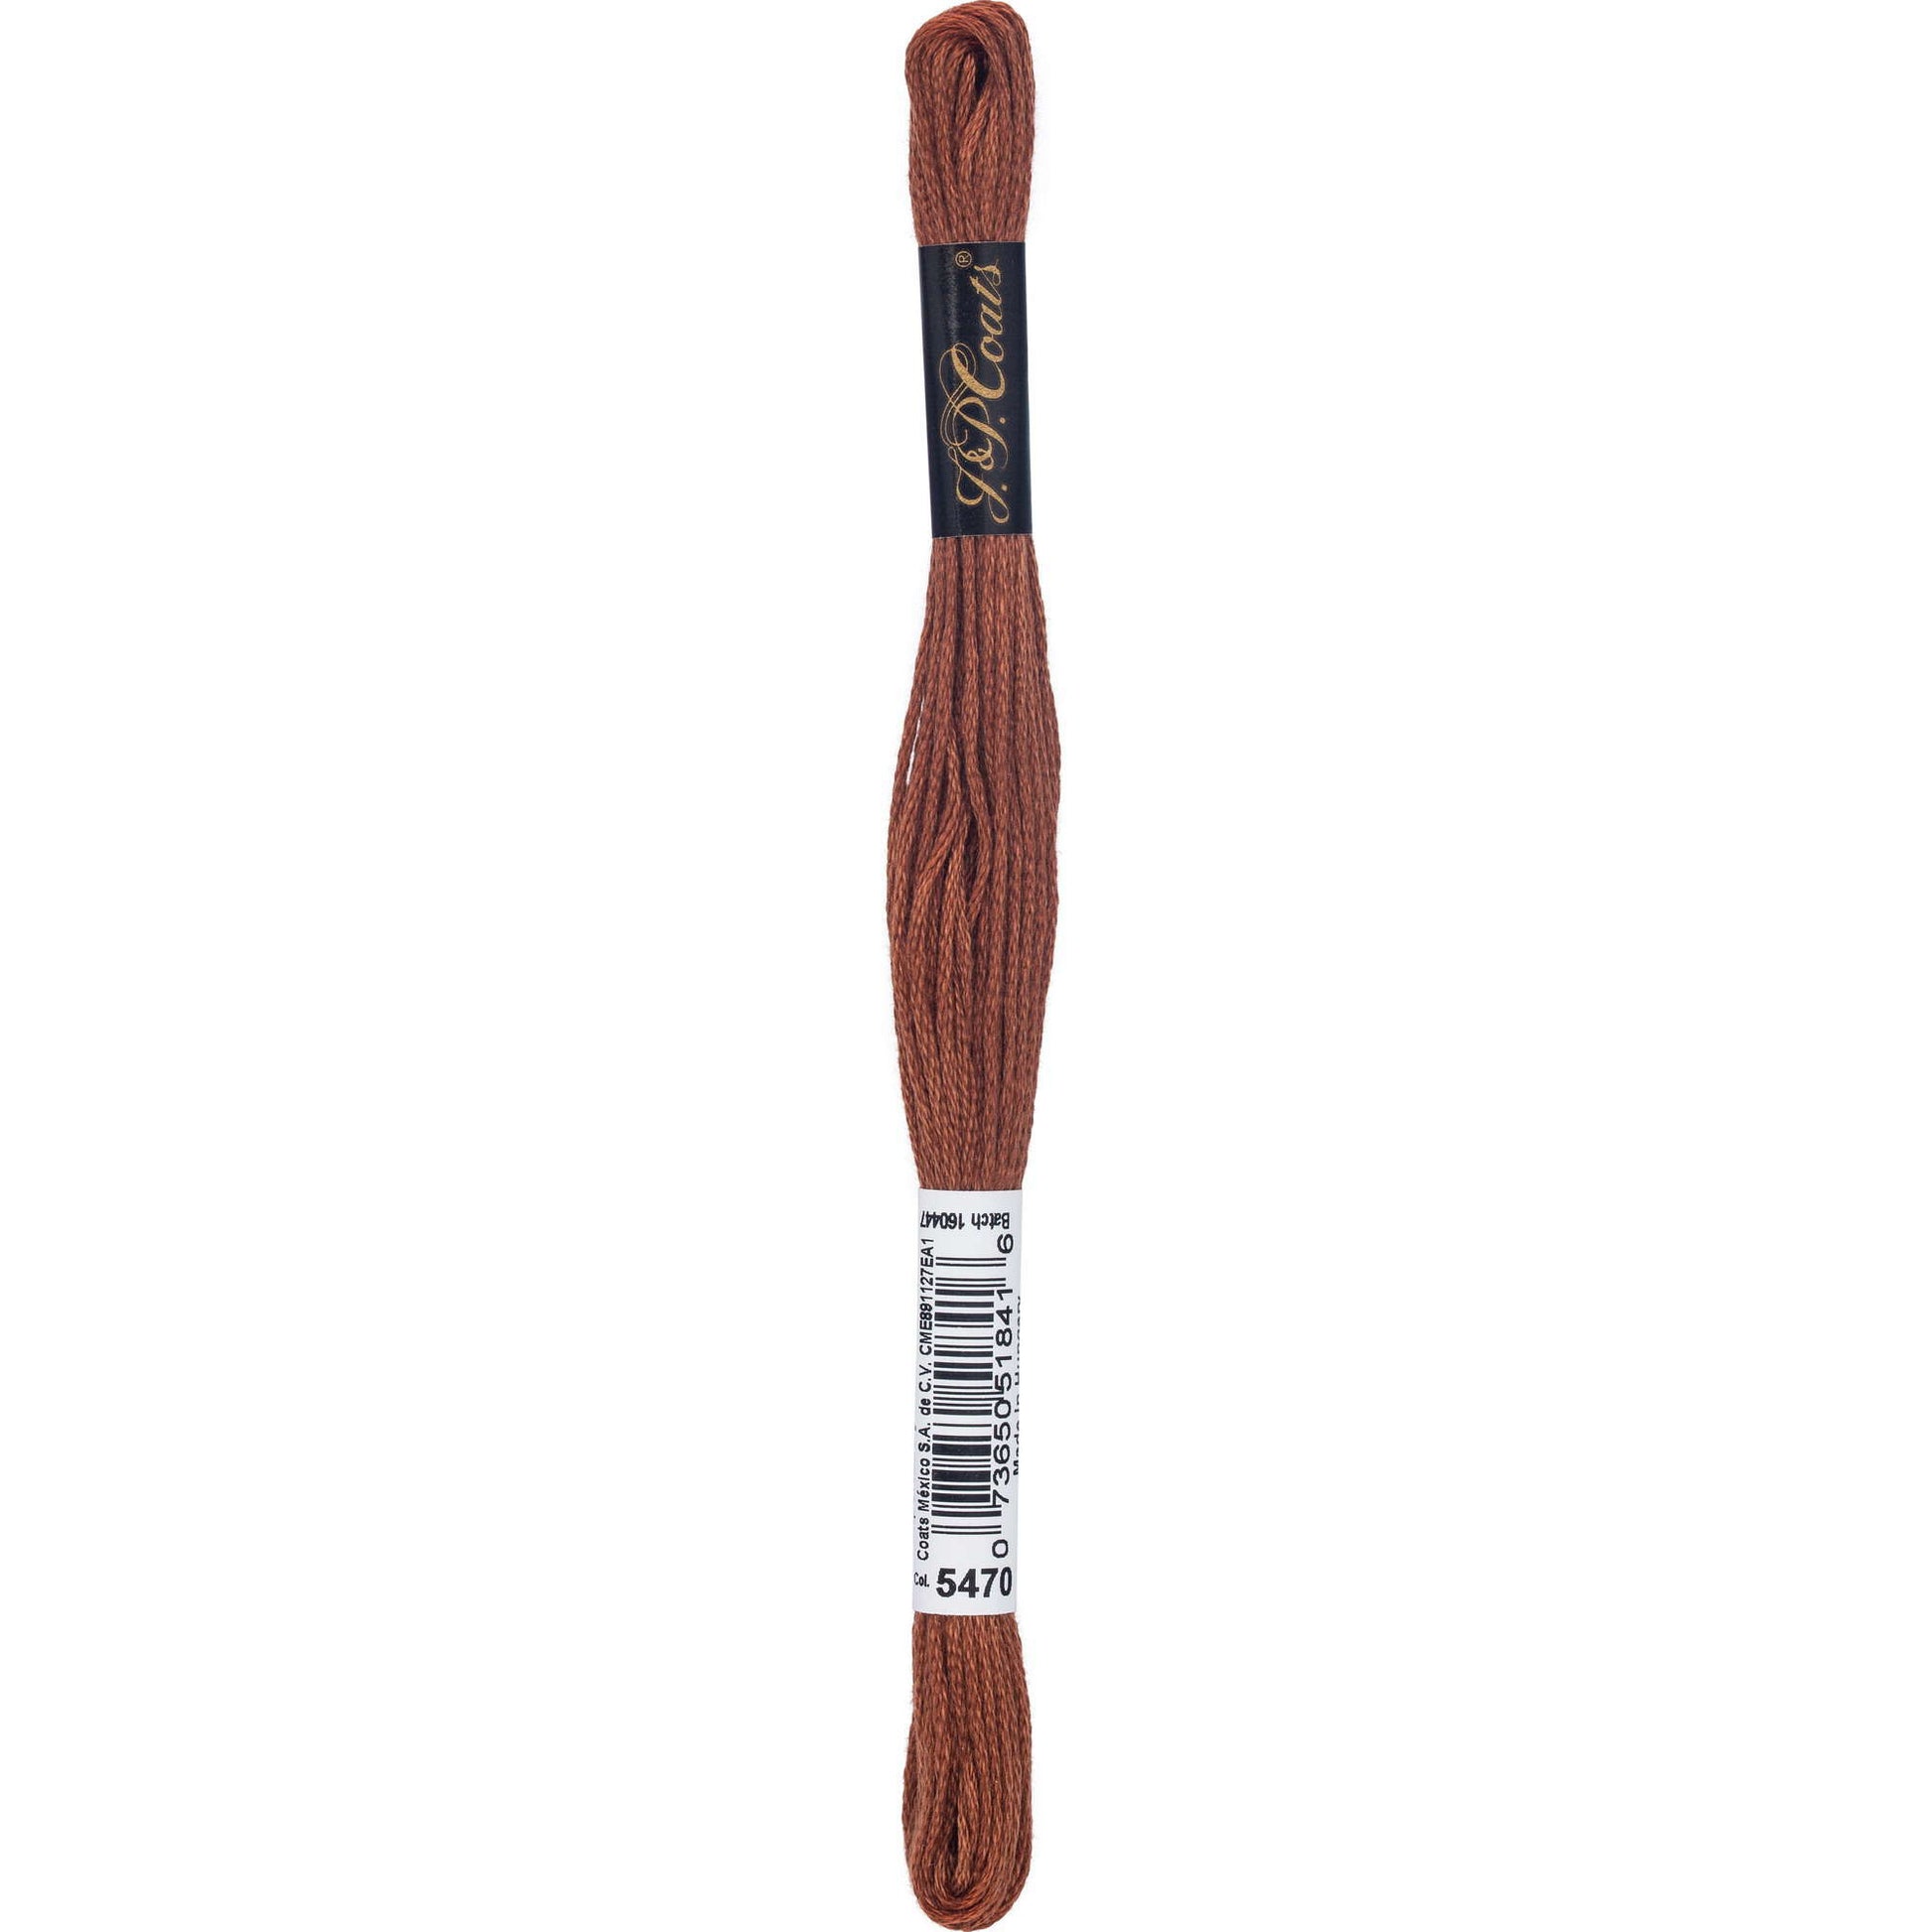 Coats & Clark Cotton Embroidery Floss Brown